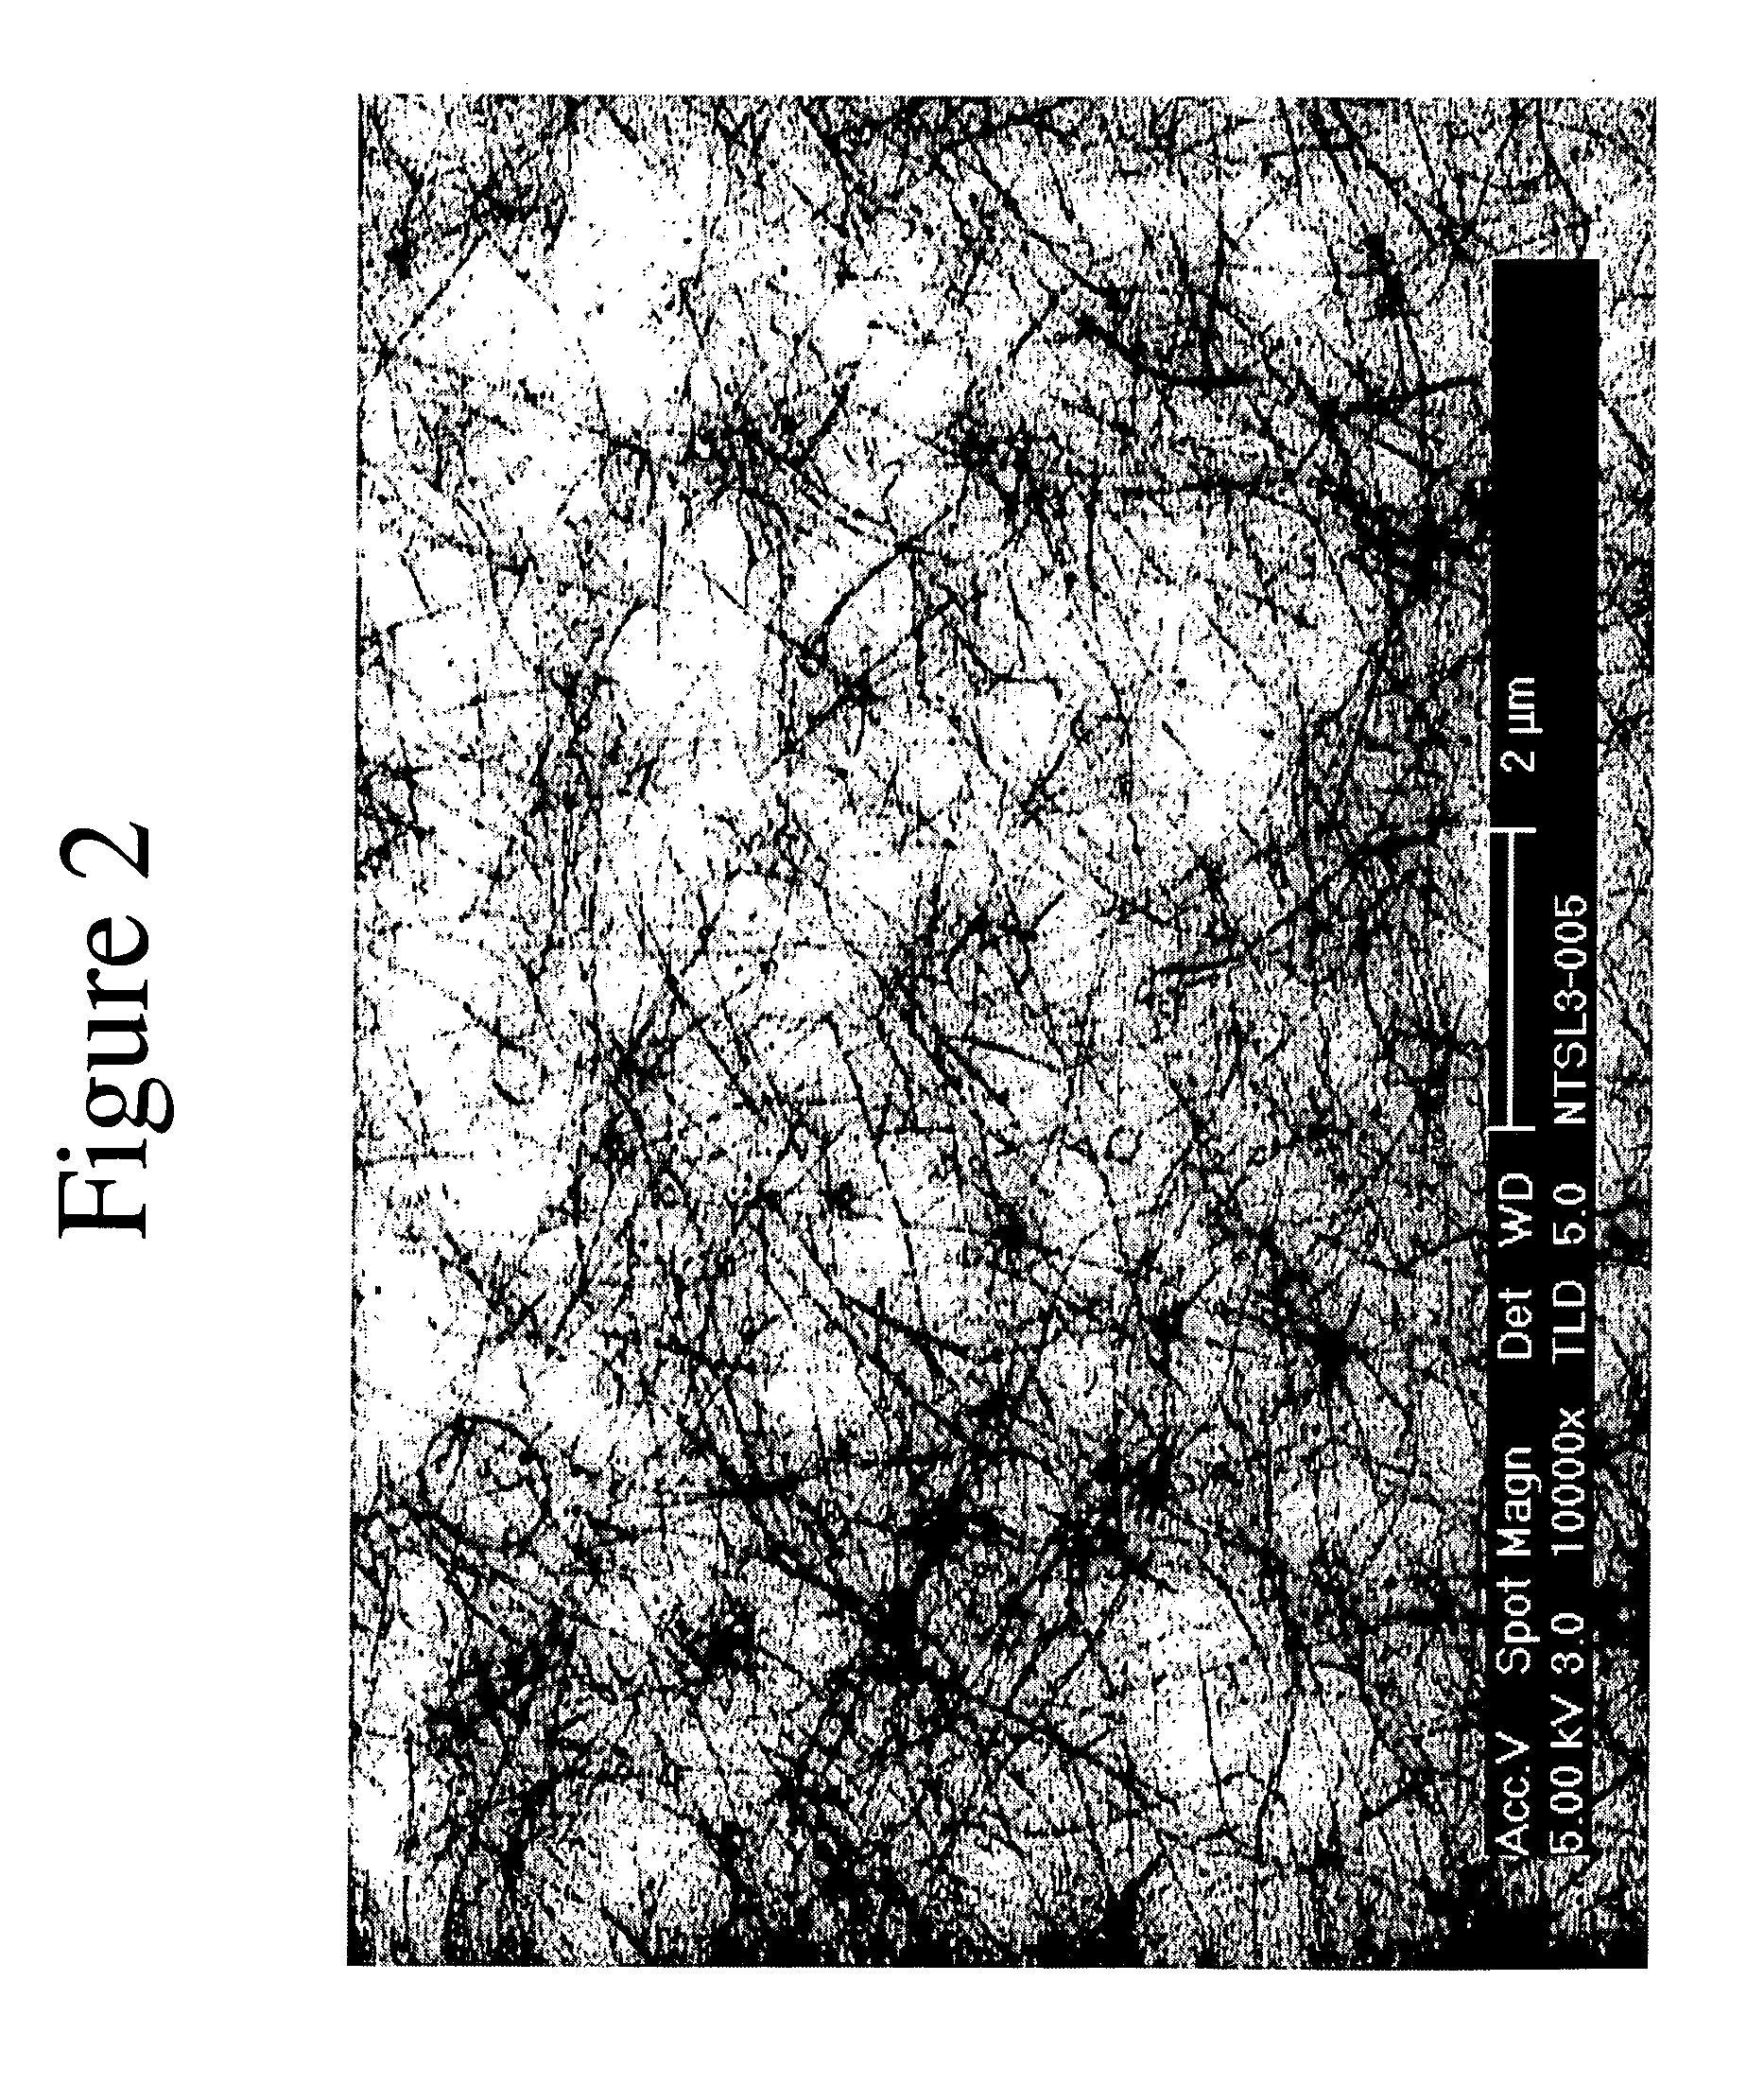 Spin-coatable liquid for use in electronic fabrication processes